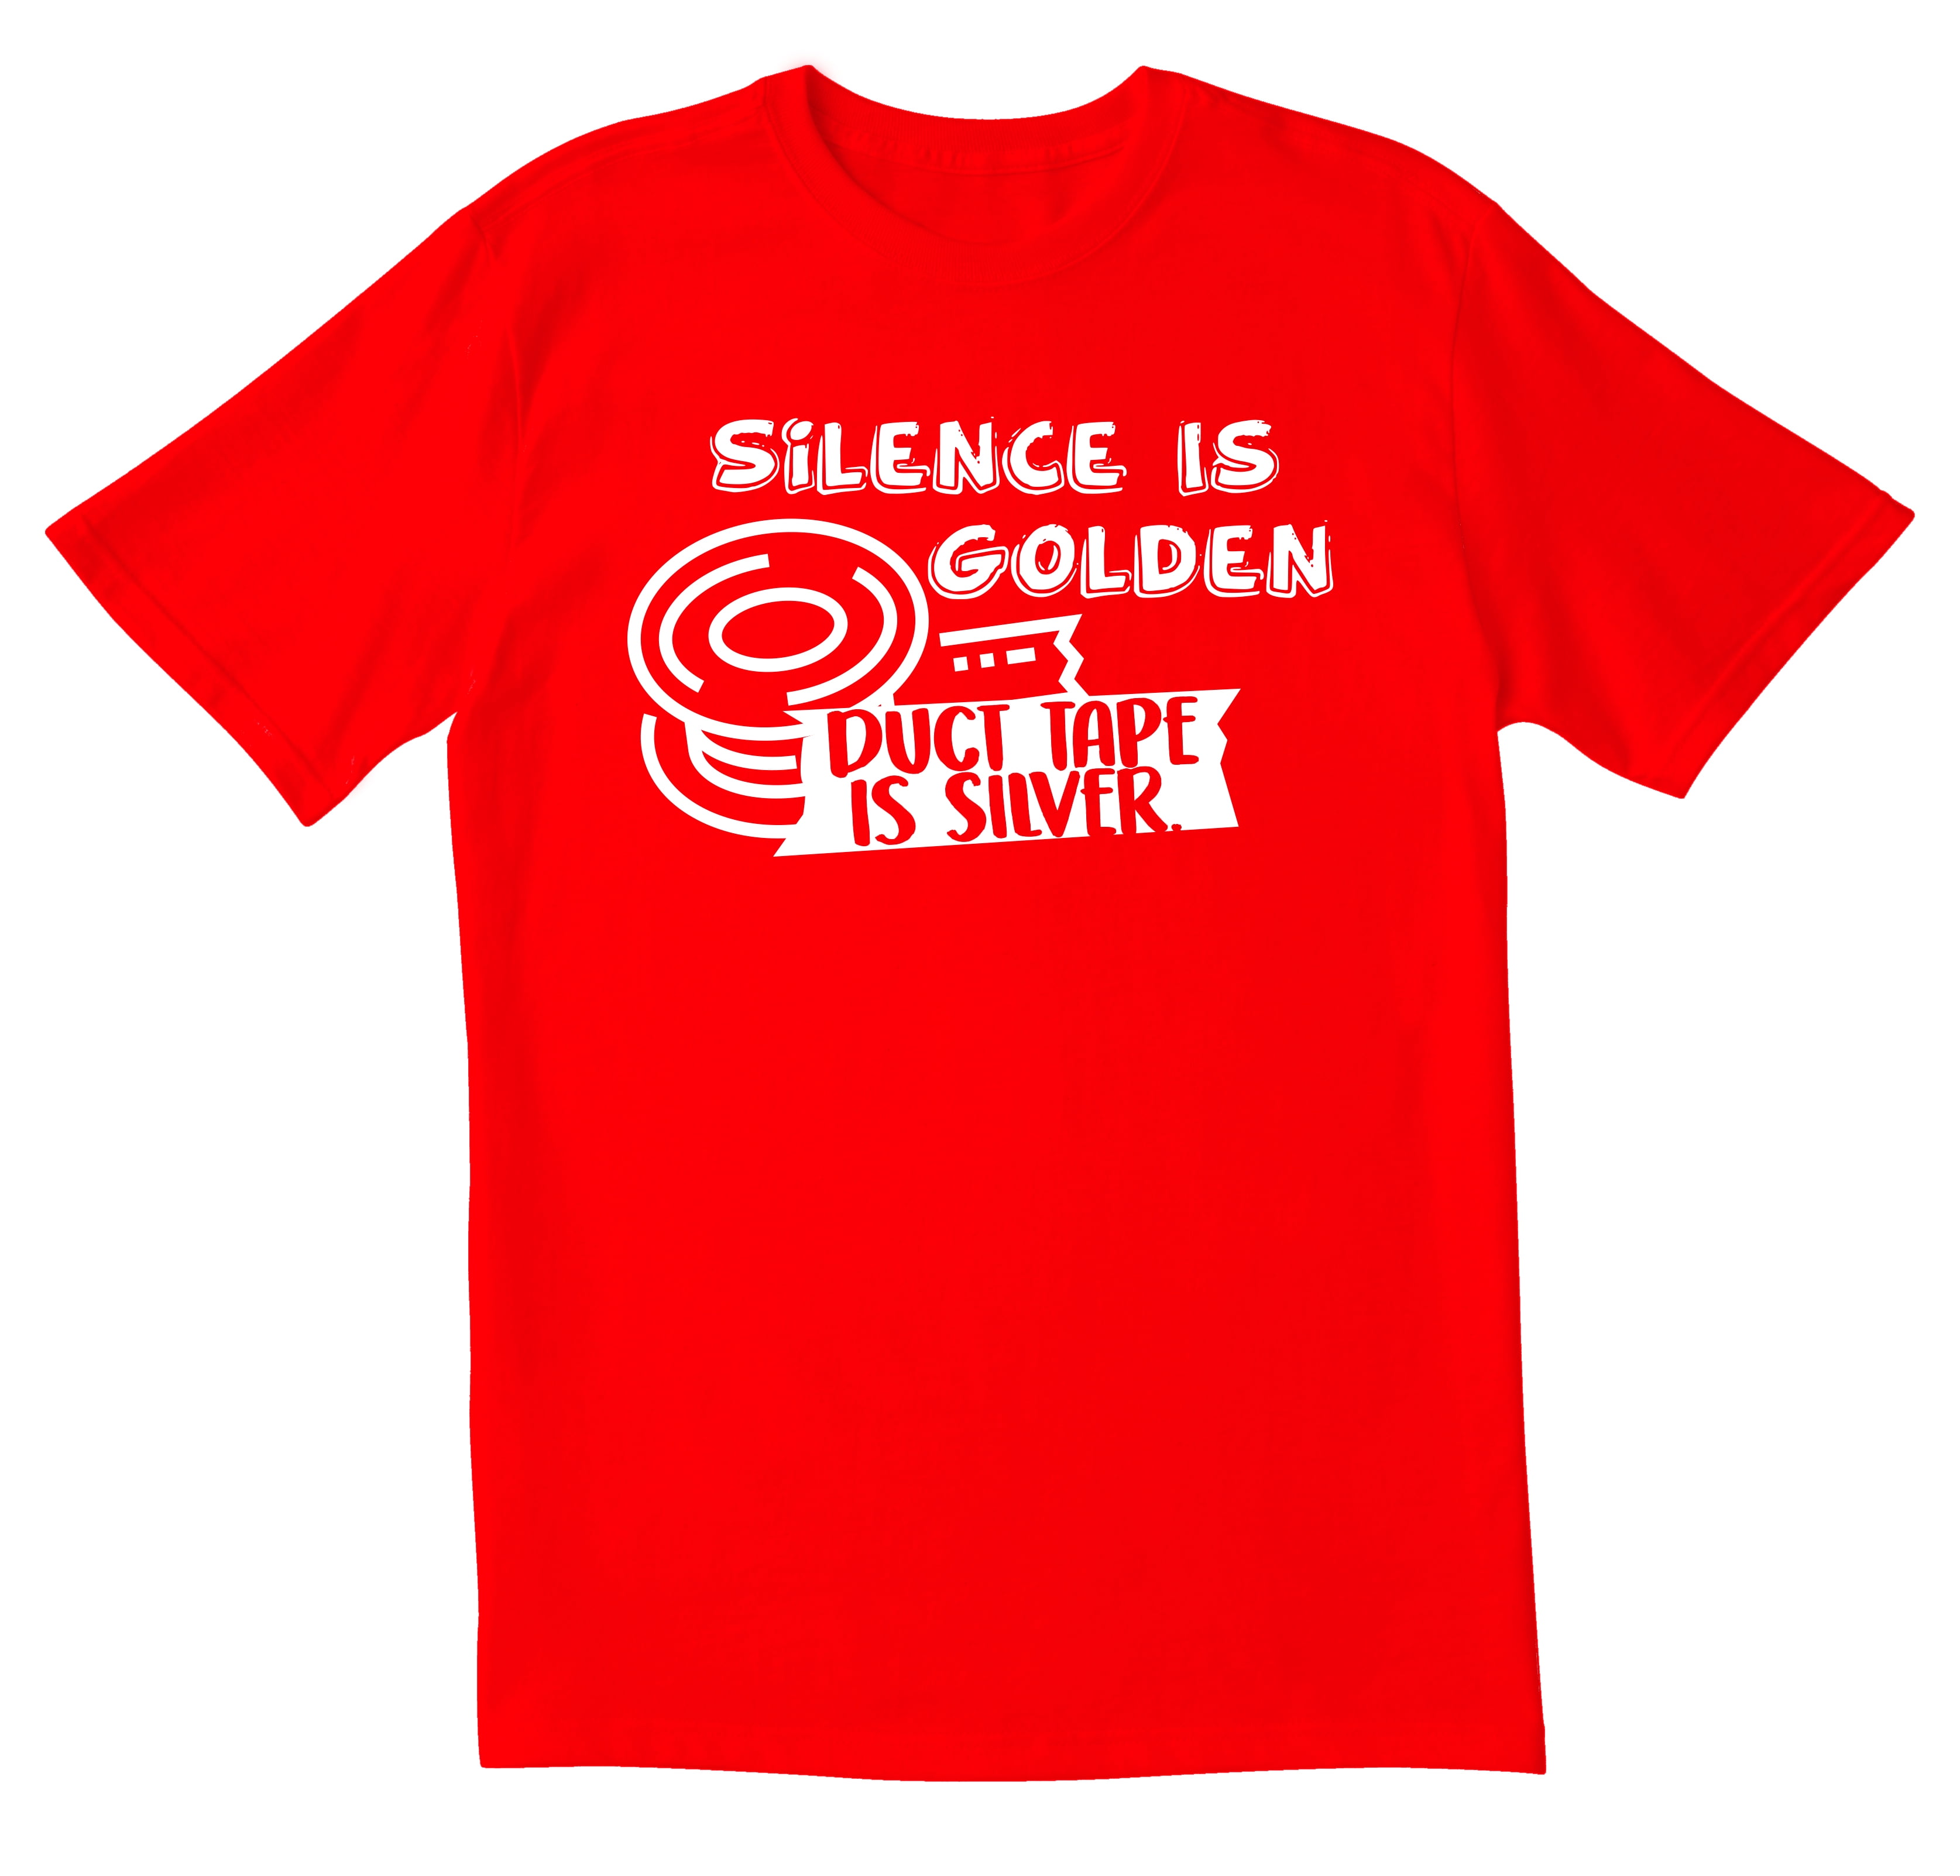 Silence is Golden Duct Tape is Silver Adult Humor Cool Sarcastic Funny T Shirts 7 Size